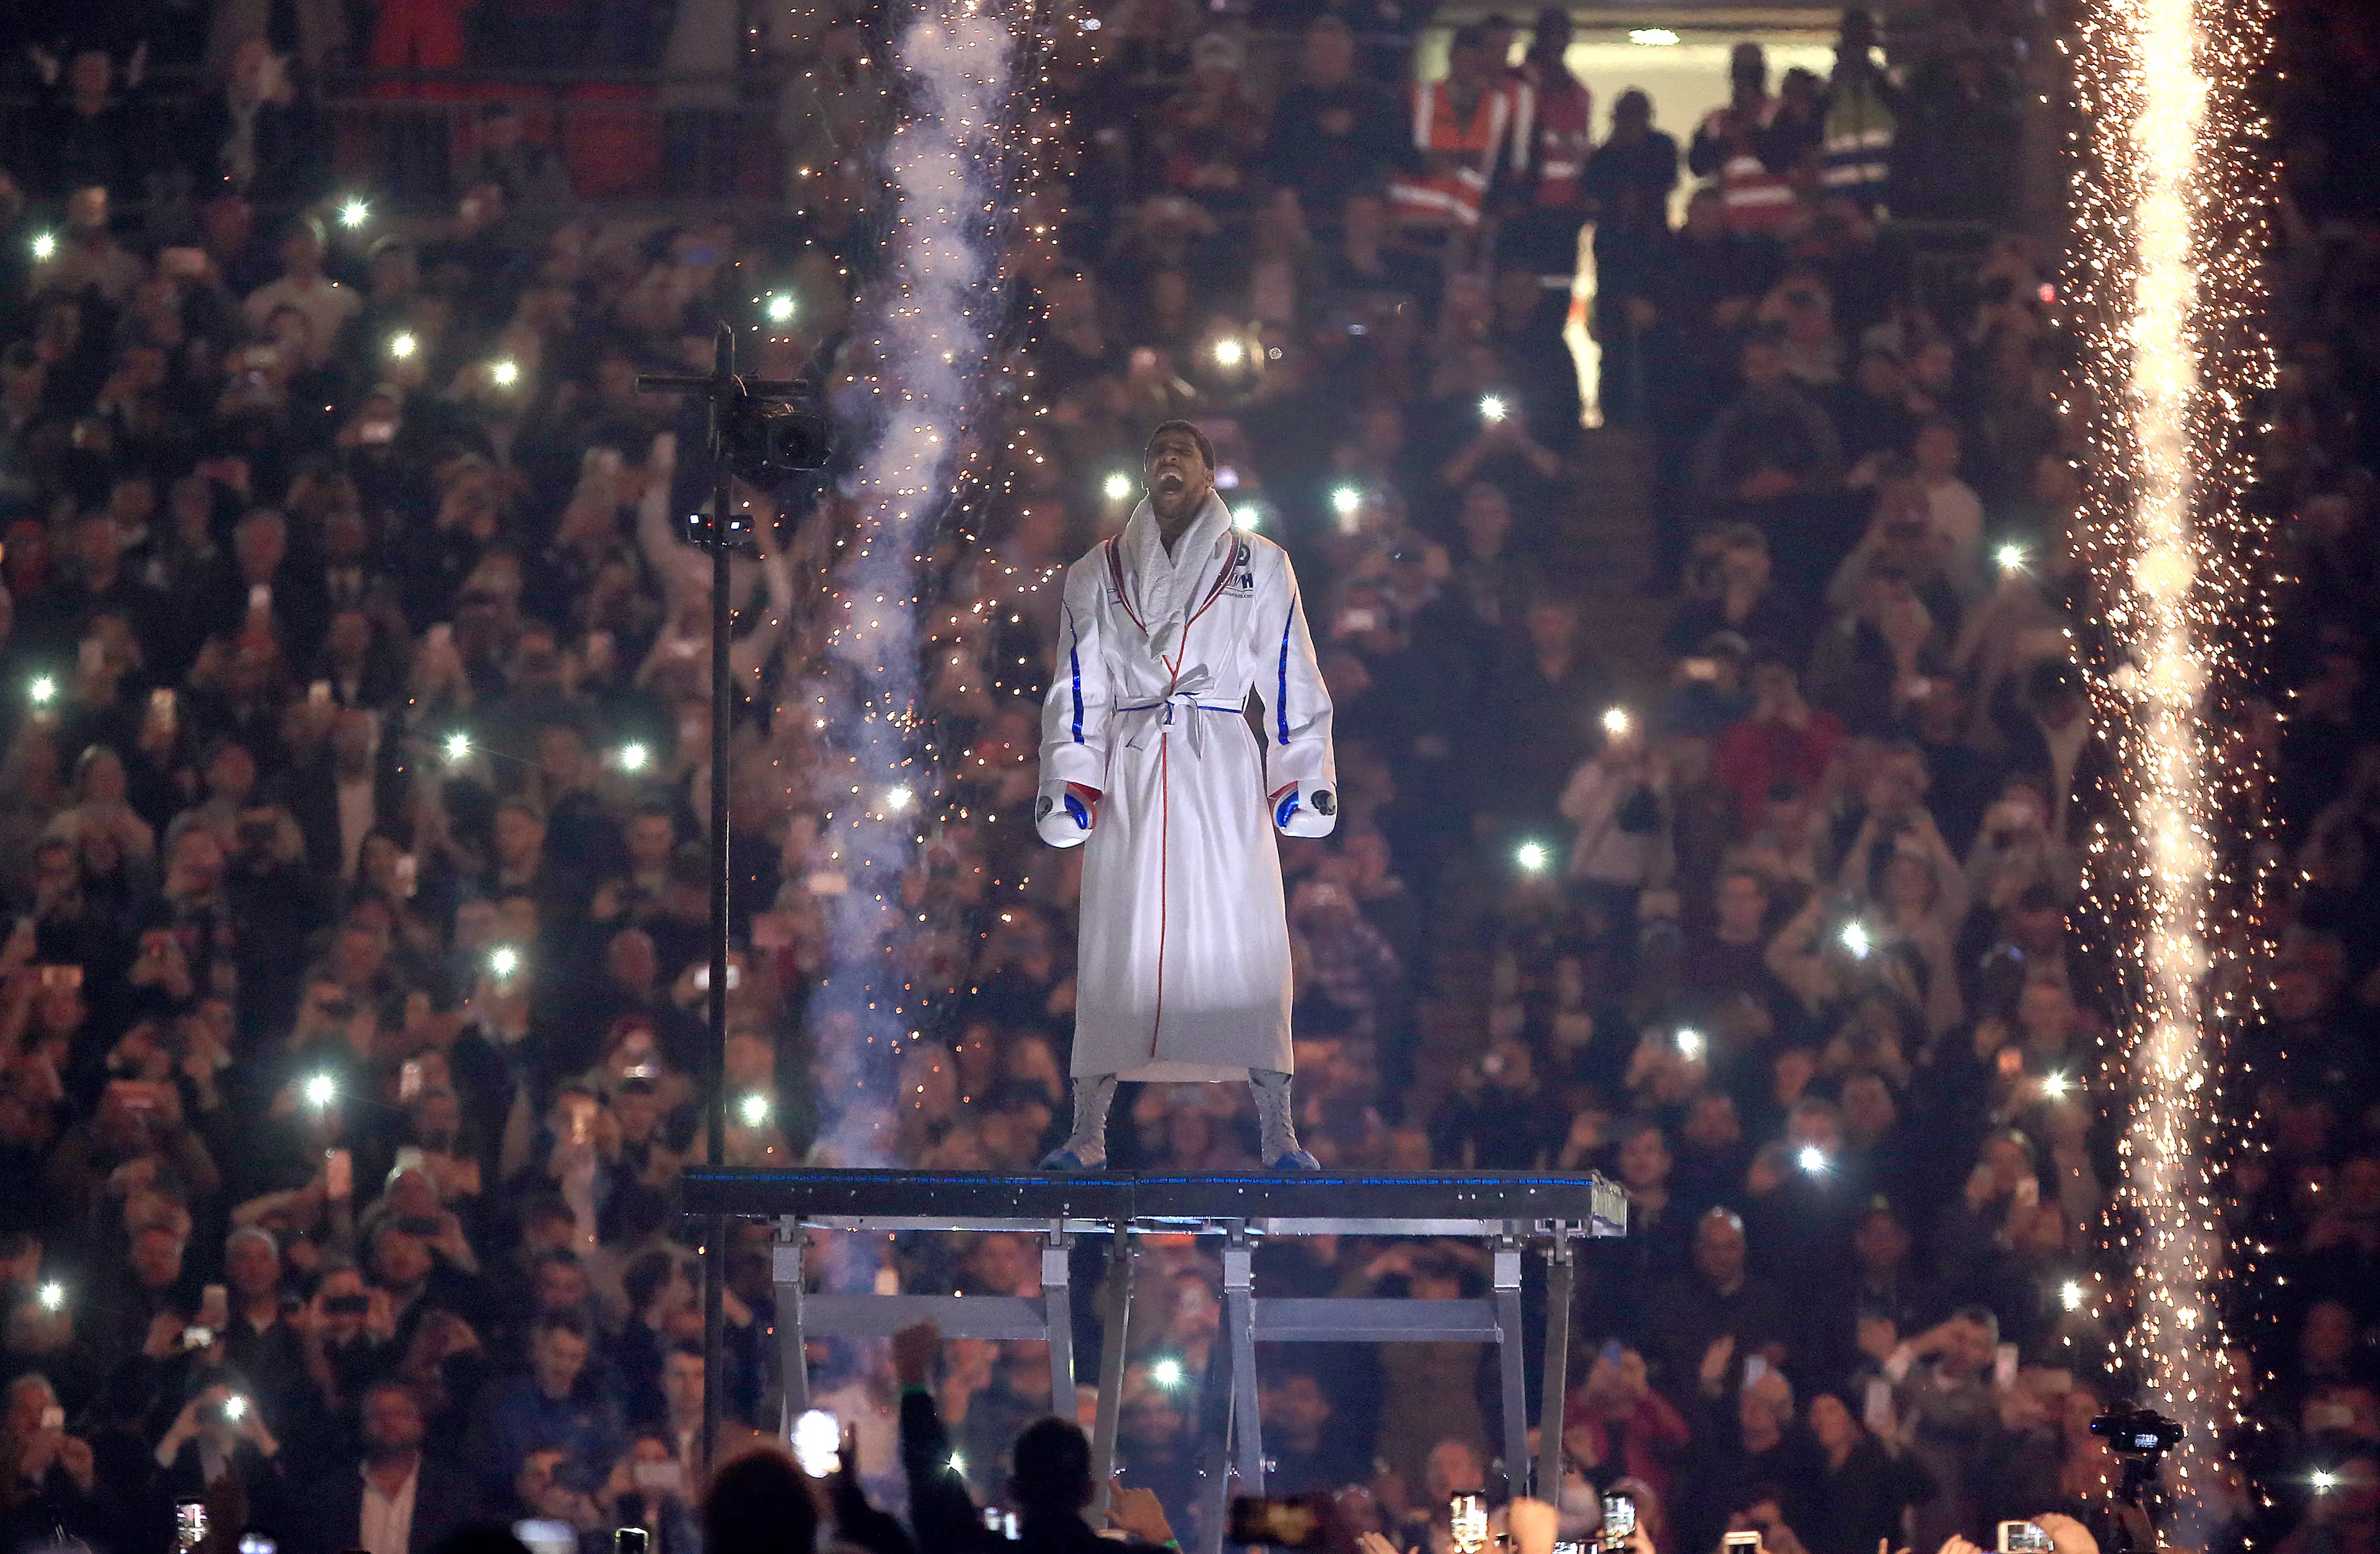 Joshua at Wembley means fireworks. Image: PA Images